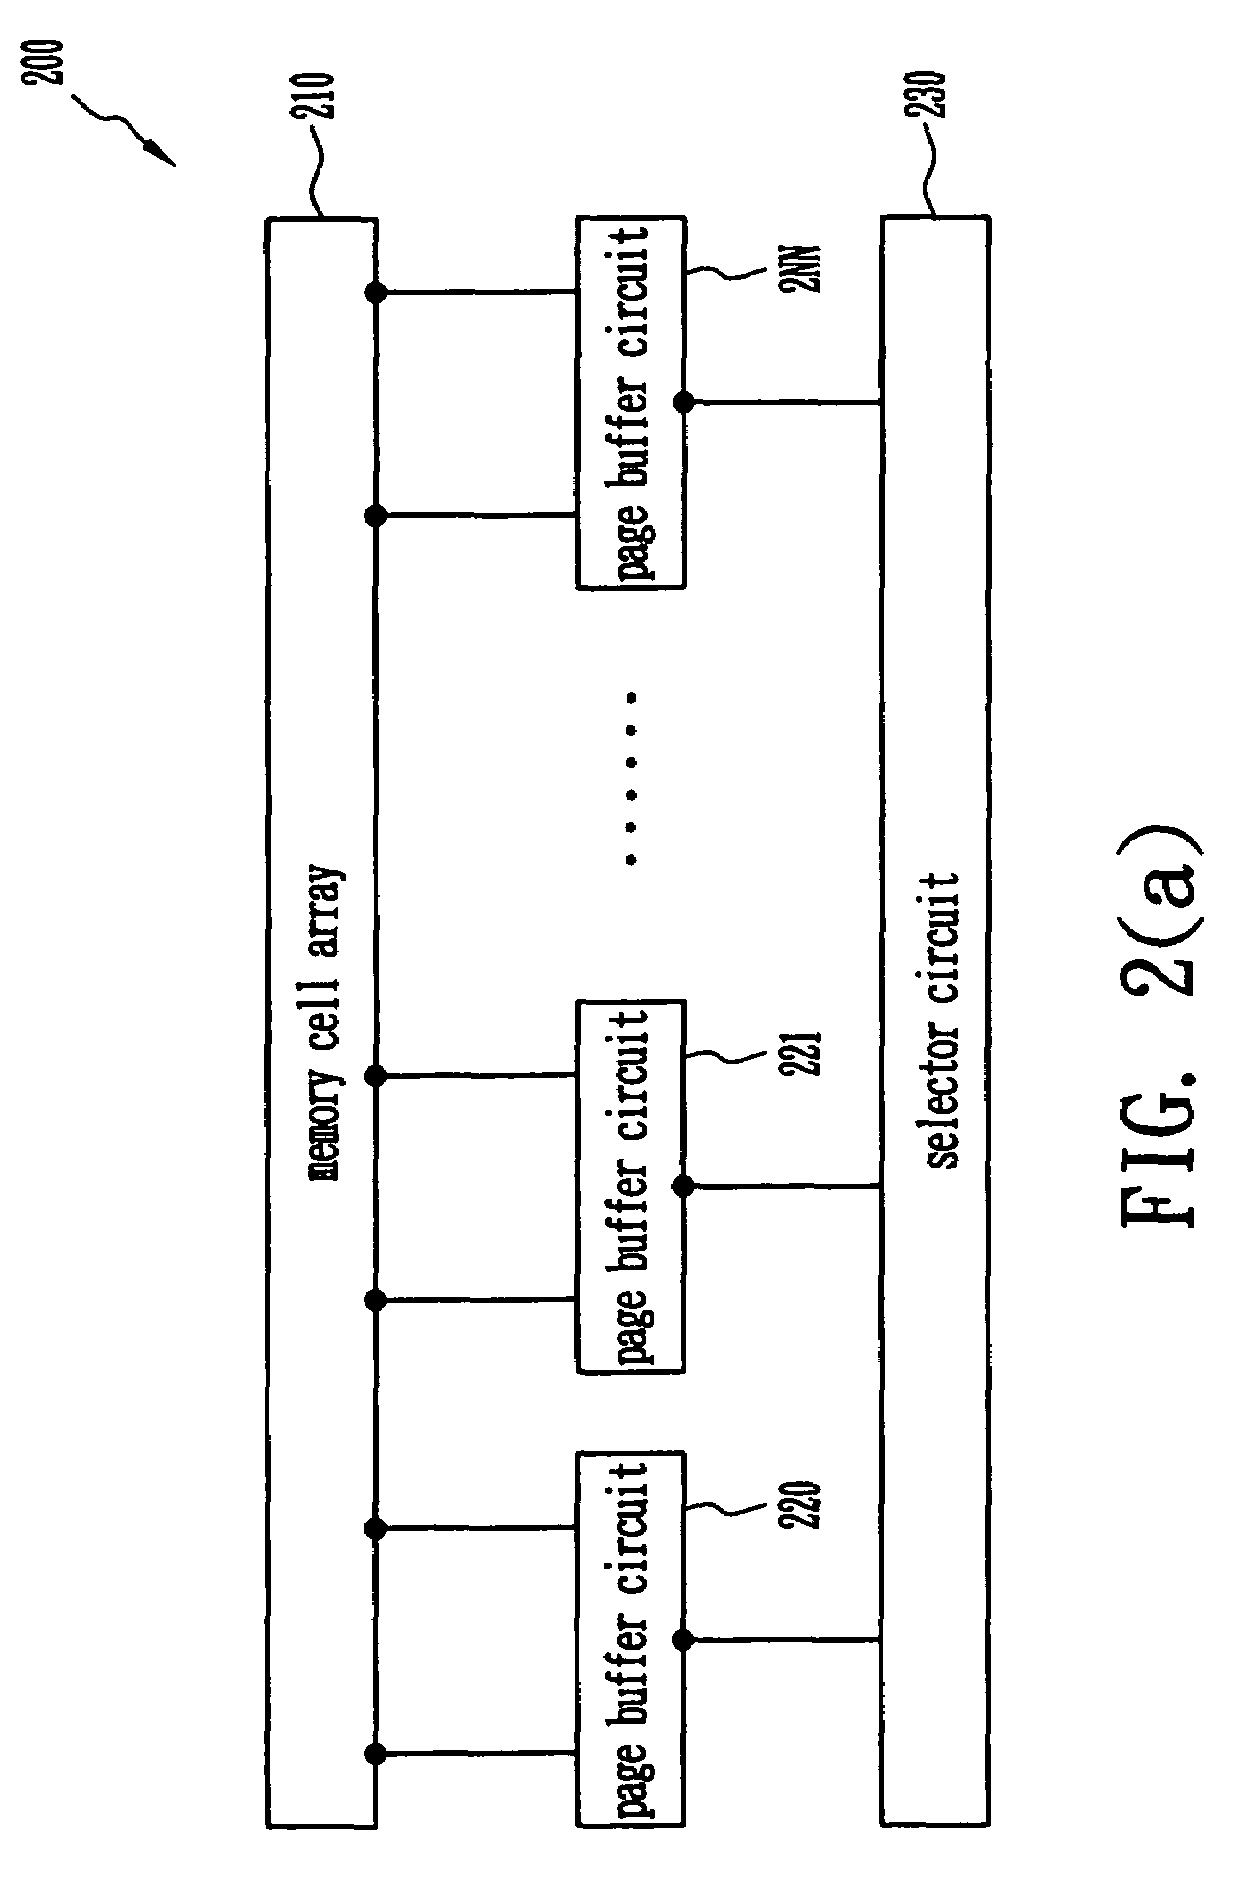 Non-volatile memory device with page buffer having dual registers and methods using the same